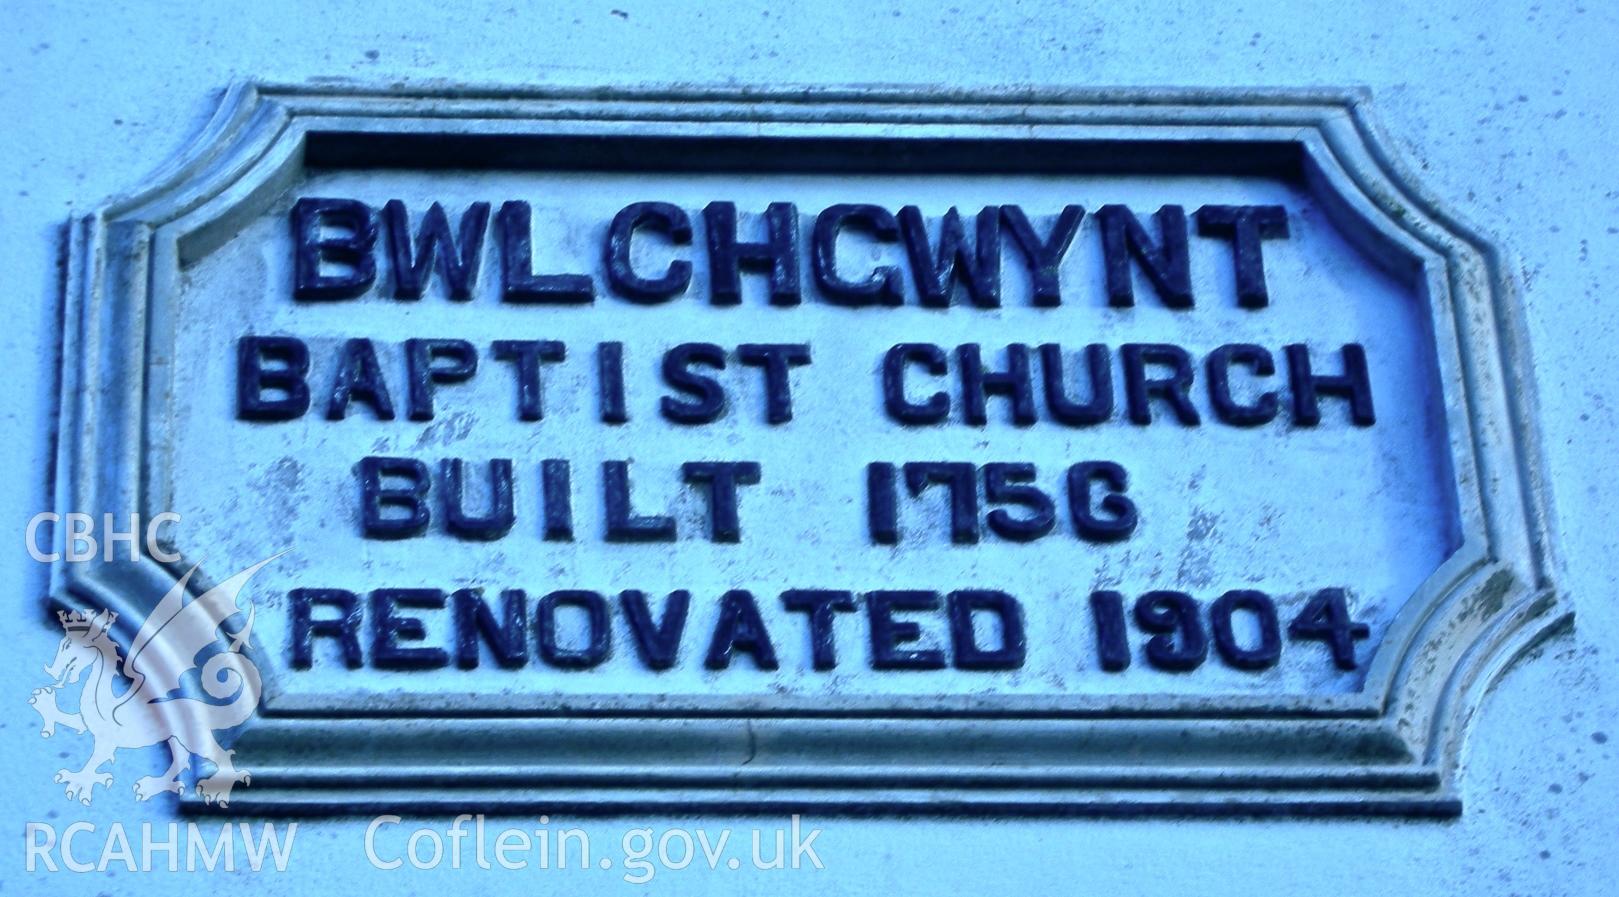 Close up of plaque situated above Bwlchgwynt Baptist Chapel entrance, photo taken in 2007 by Keith Bowen
BWLCHGWYN BAPTIST CHURCH / BUILT 1756 / RENOVATED 1904